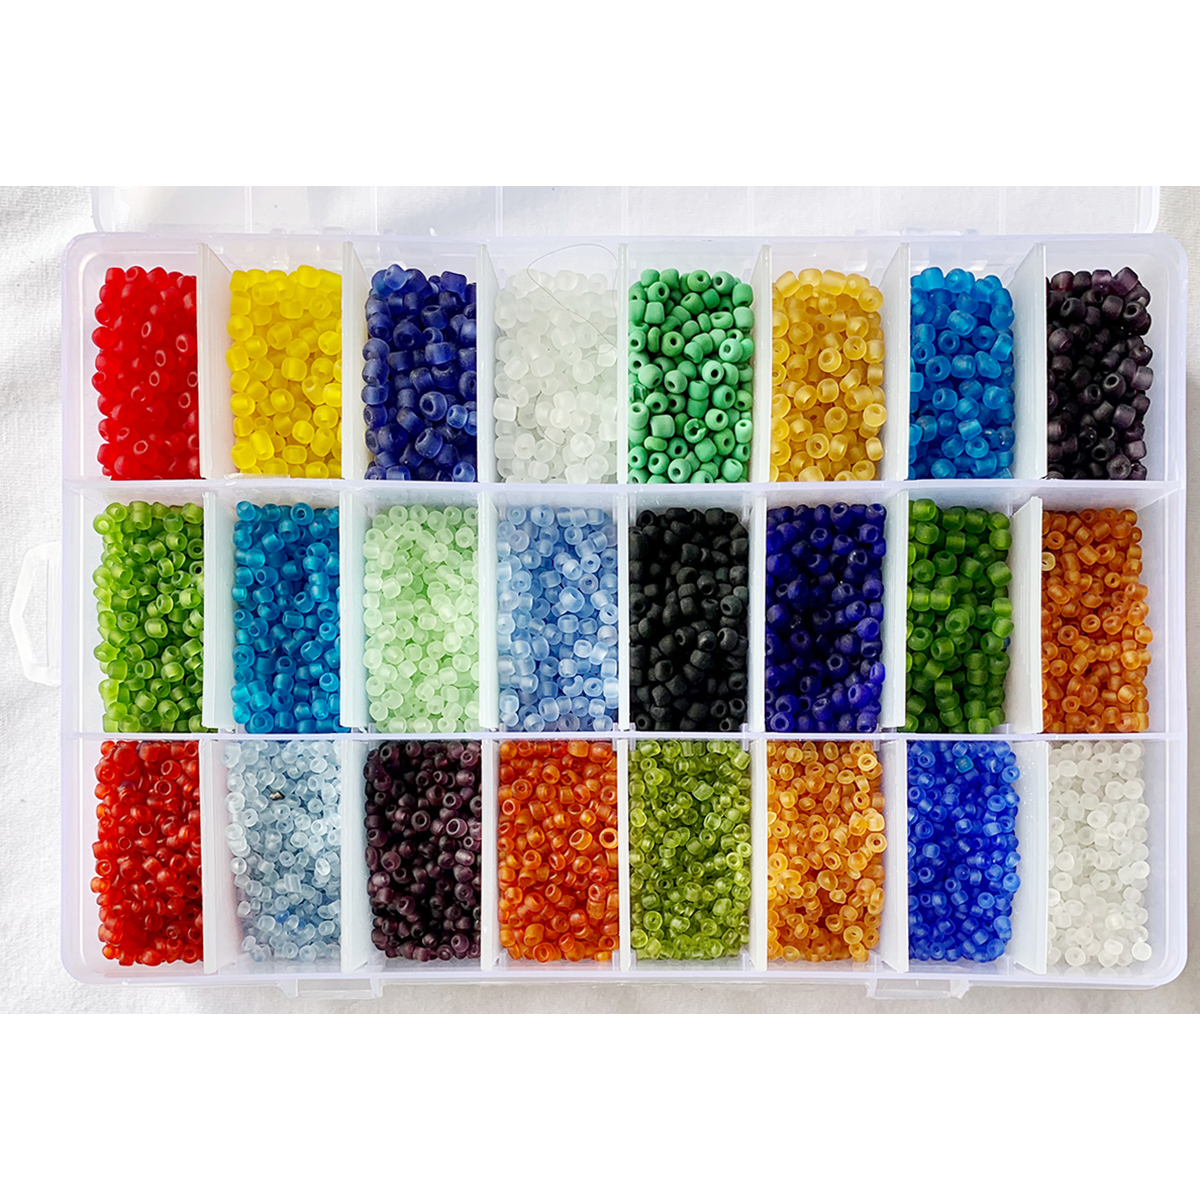 E Beads and Seed Beads Kit